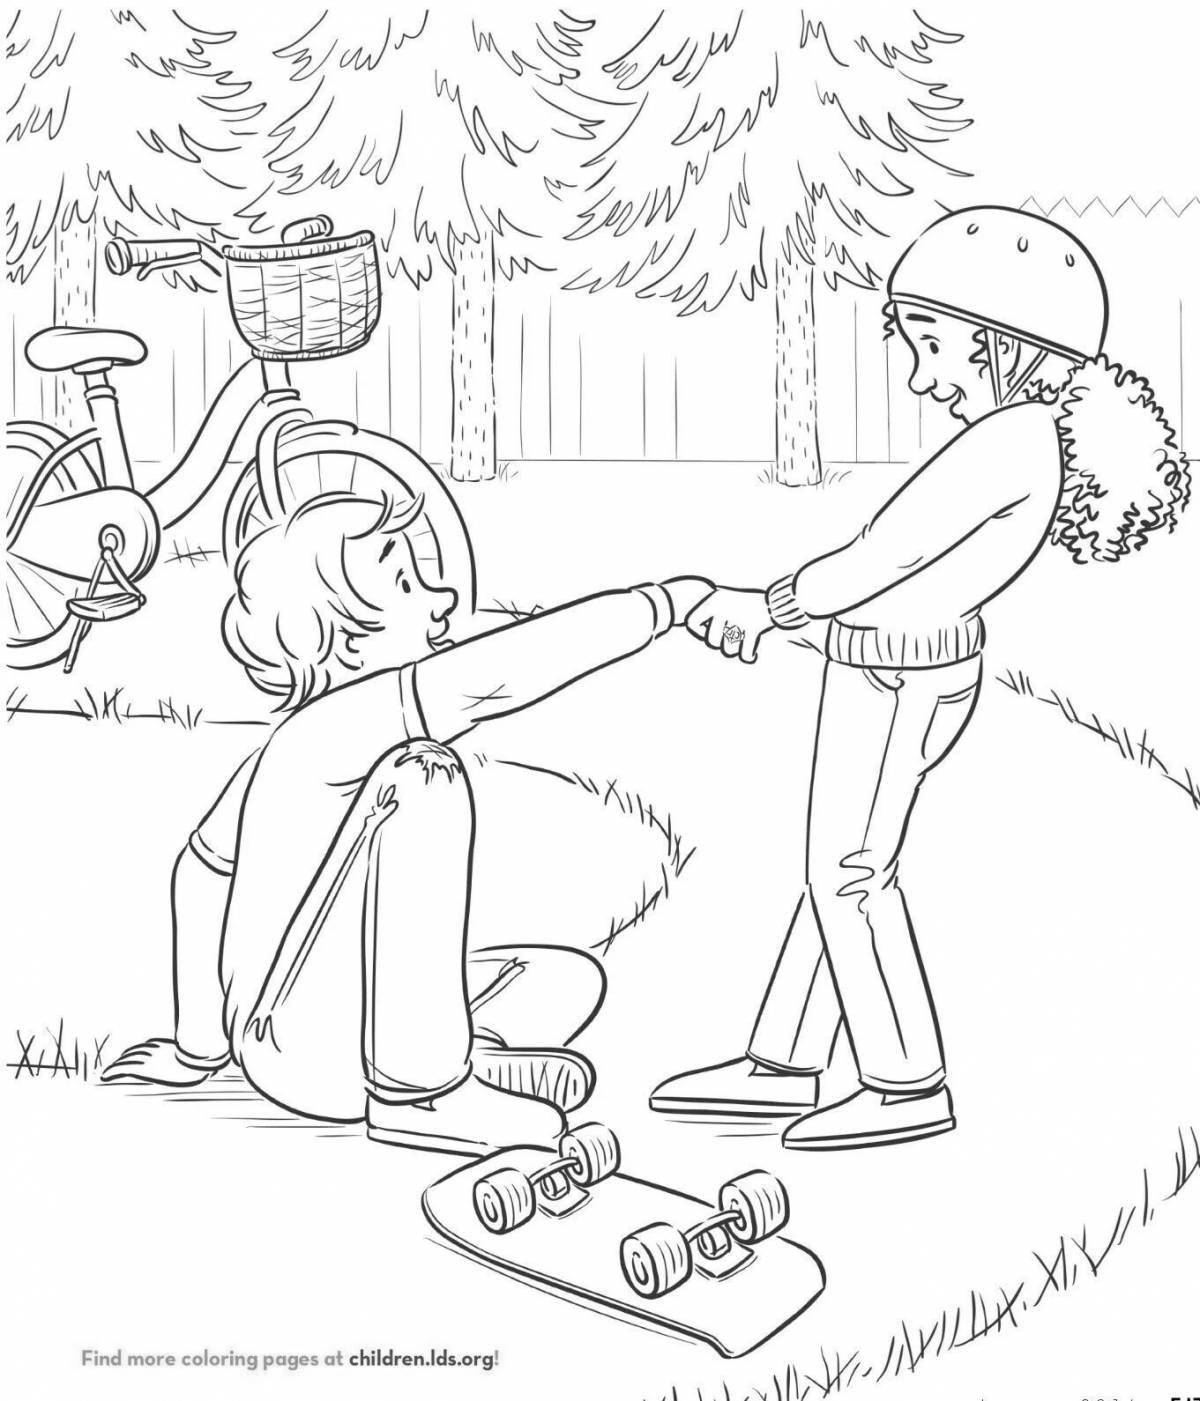 Animated good deeds coloring page